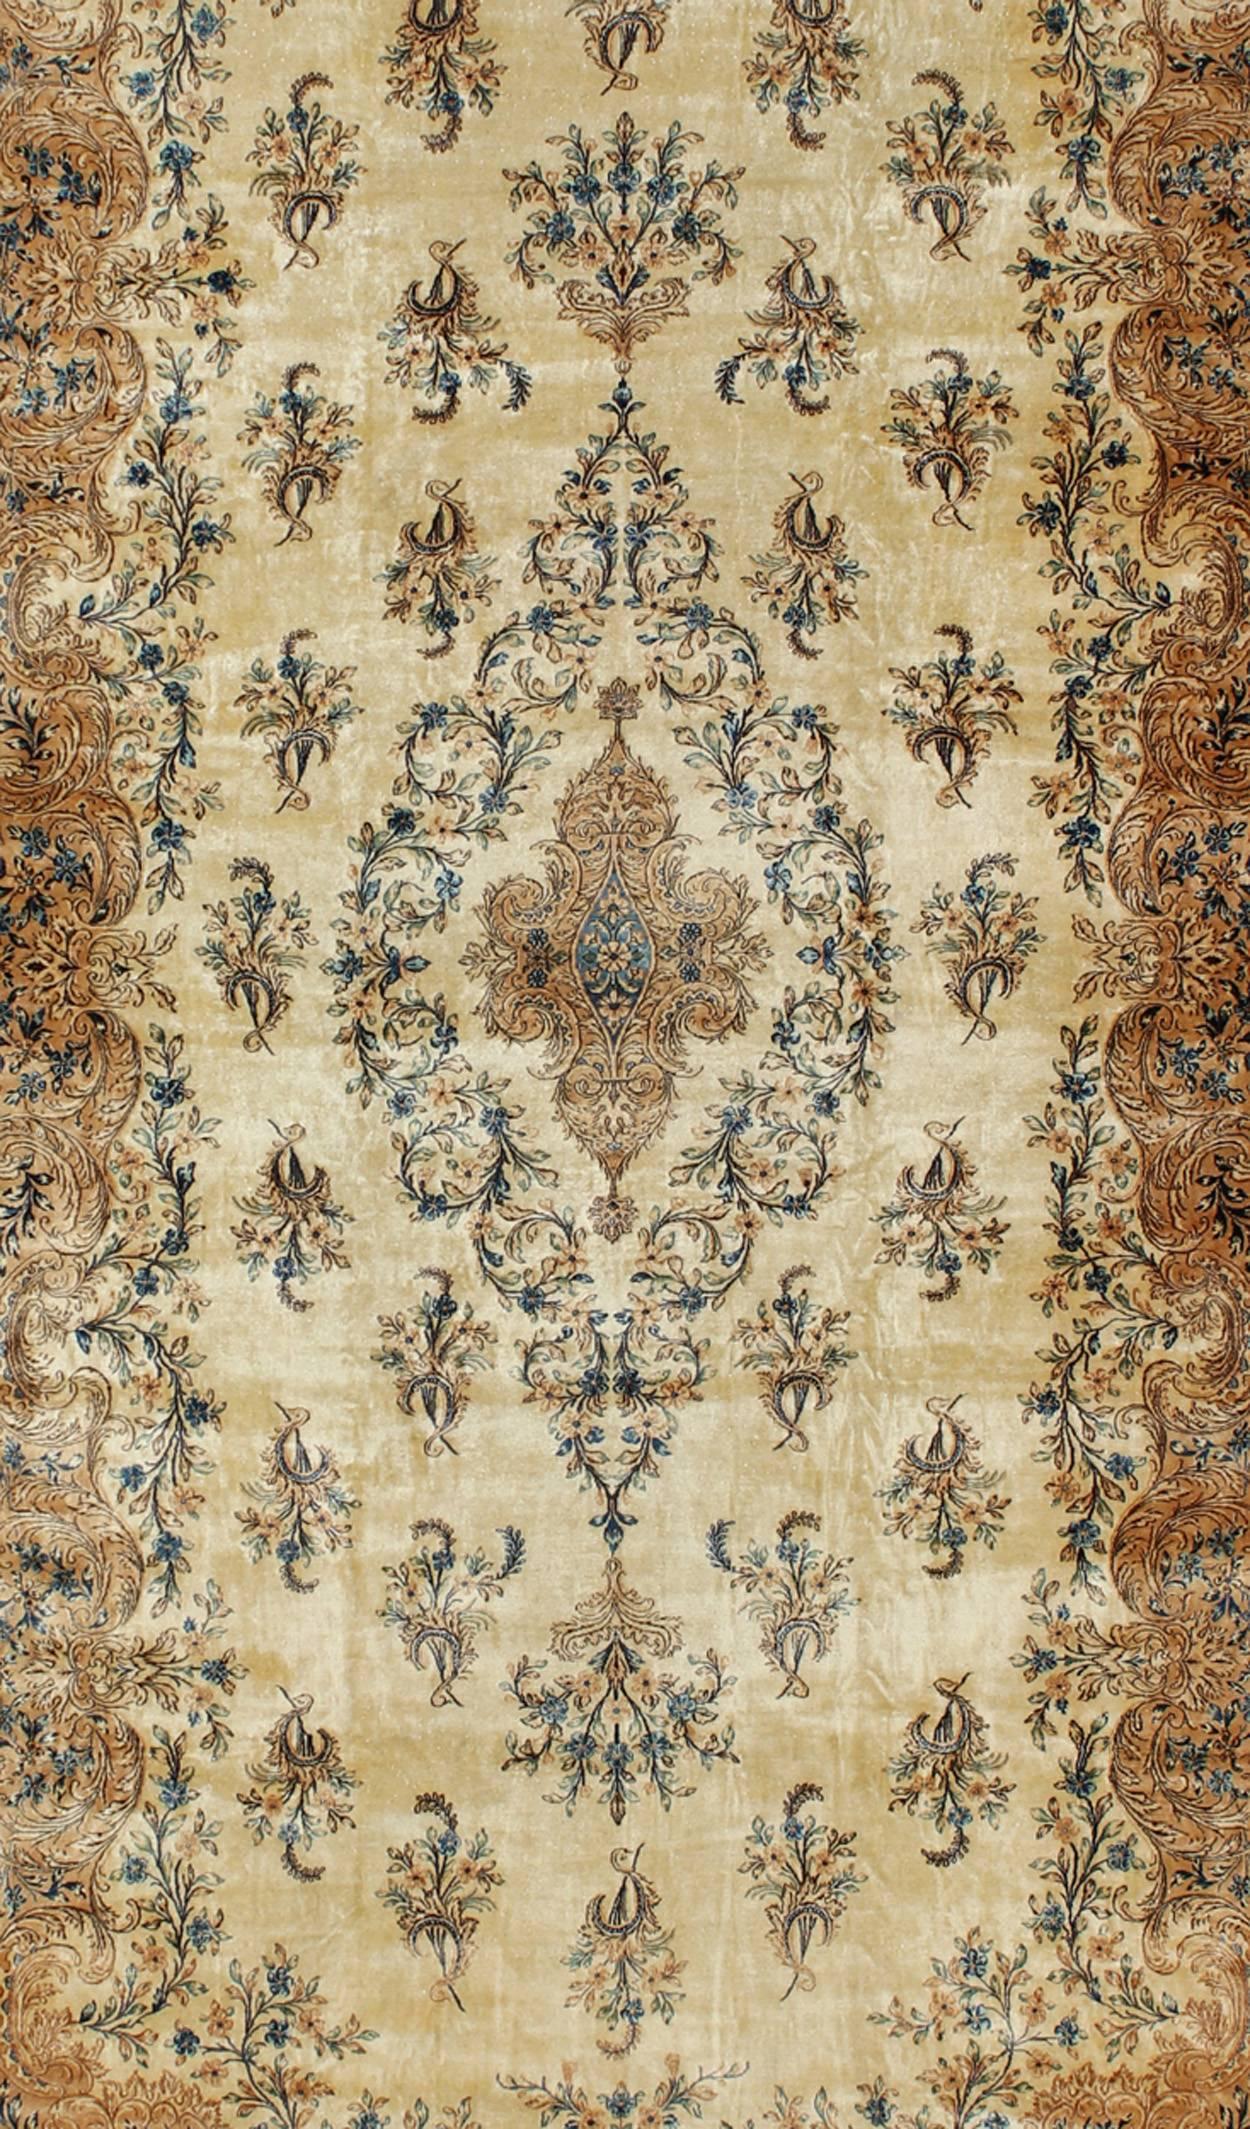 Kirman Large Antique Lavar Kerman Rug with Blossoming Floral Motifs in Cream and Blue